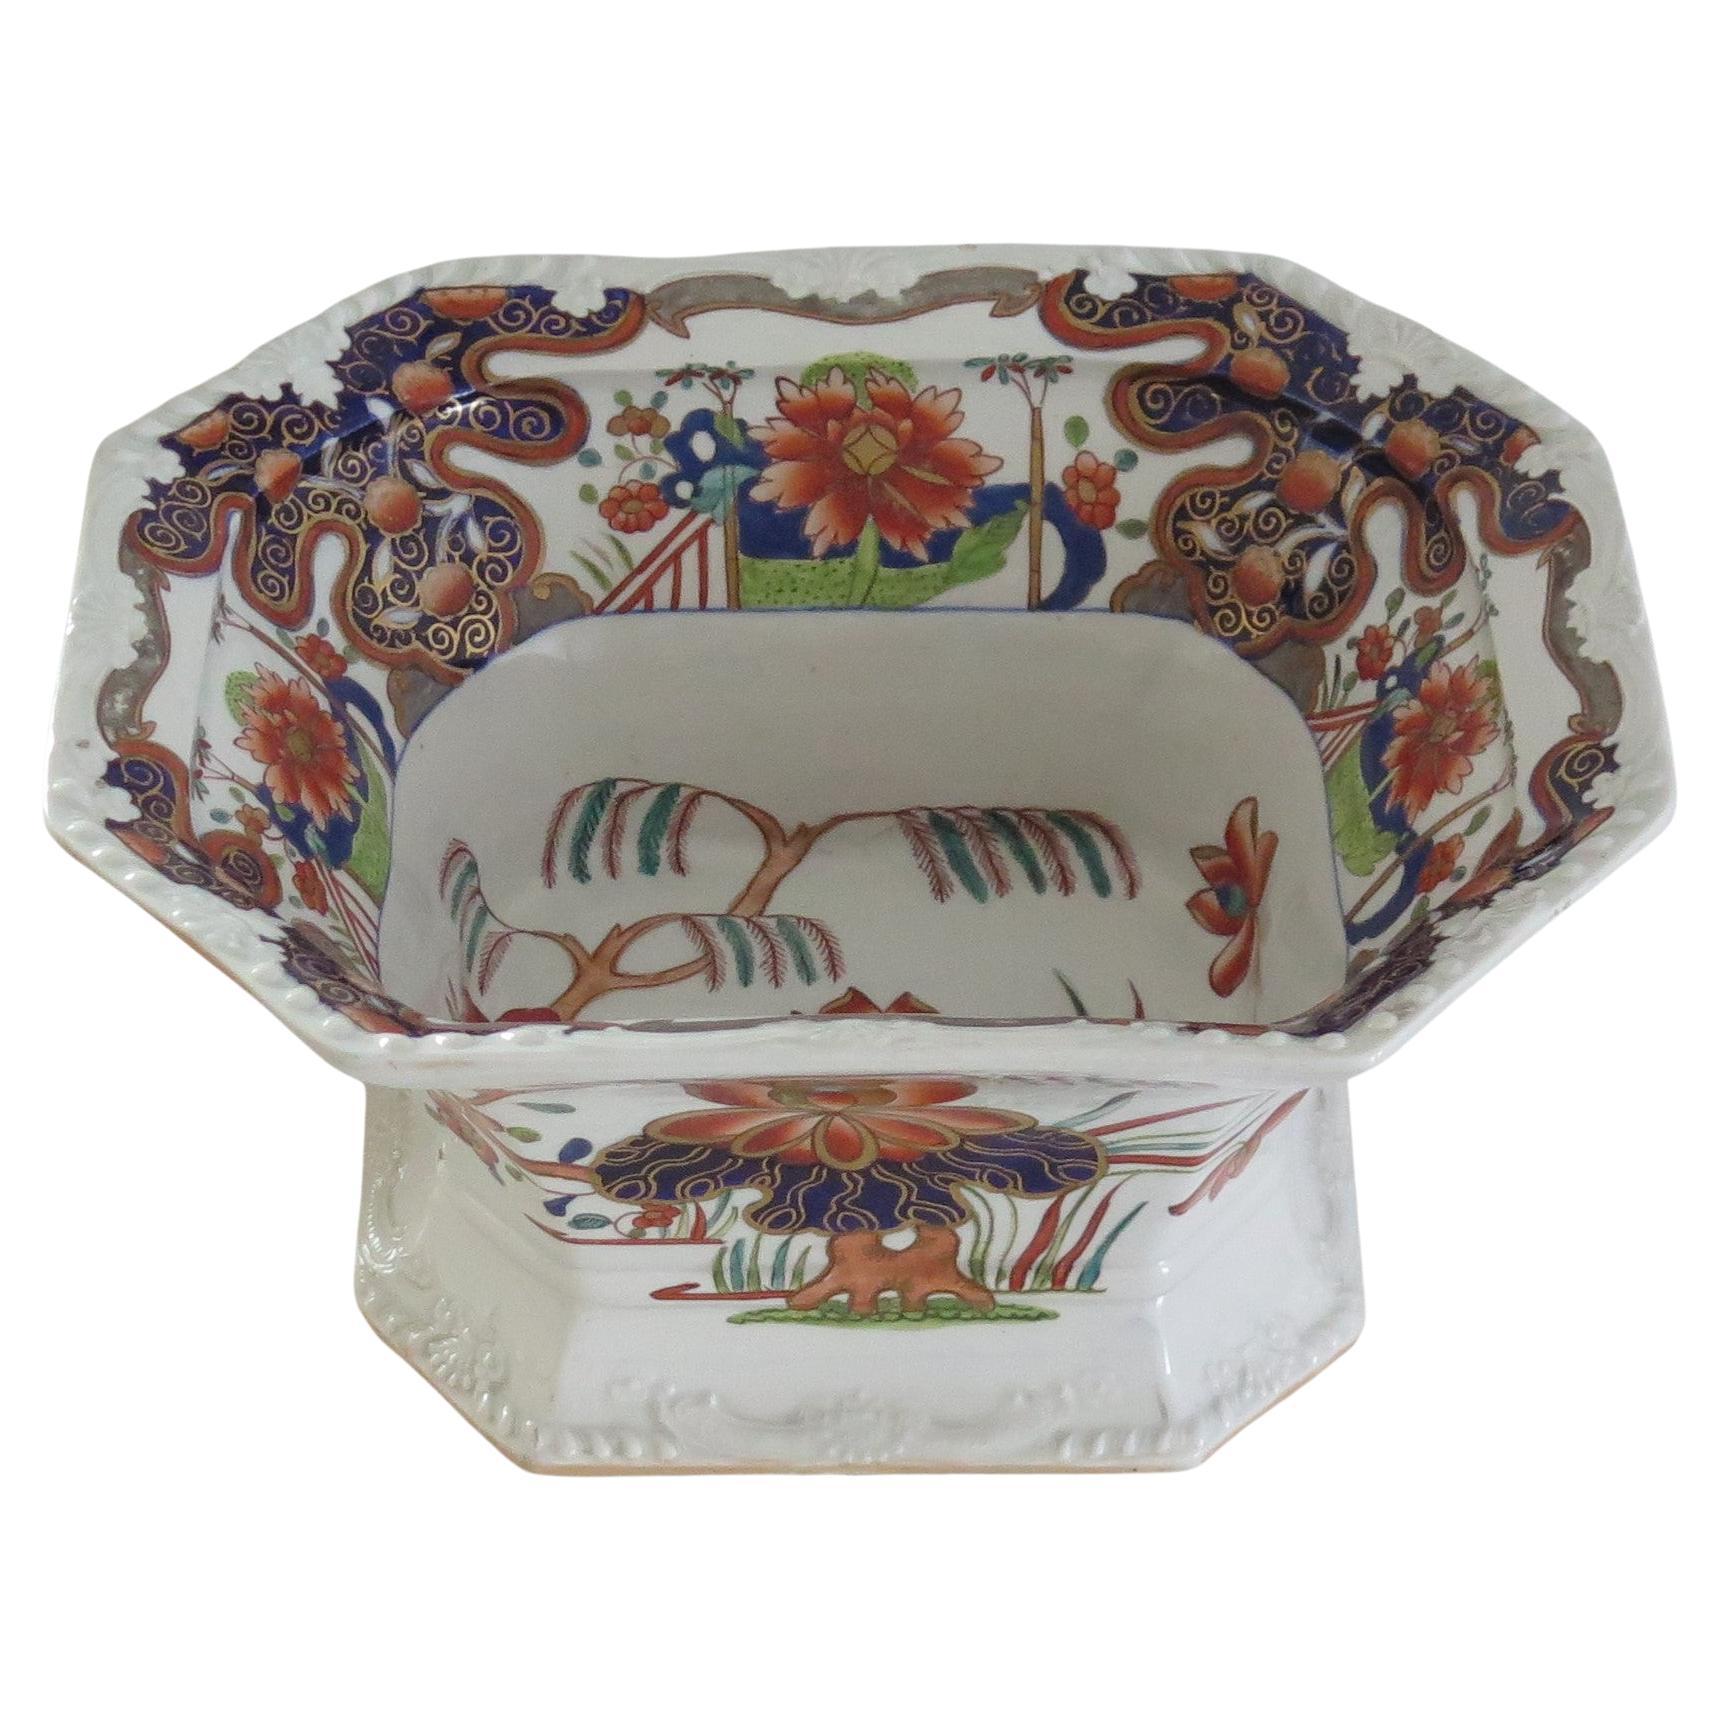 This is a beautifully hand painted large Serving Bowl in the rare Water Lily and Willow pattern by Mason's Ironstone, Lane Delph, England, dating to circa 1818.

The piece is well potted as a deep bowl on a raised foot or plinth. The top inner